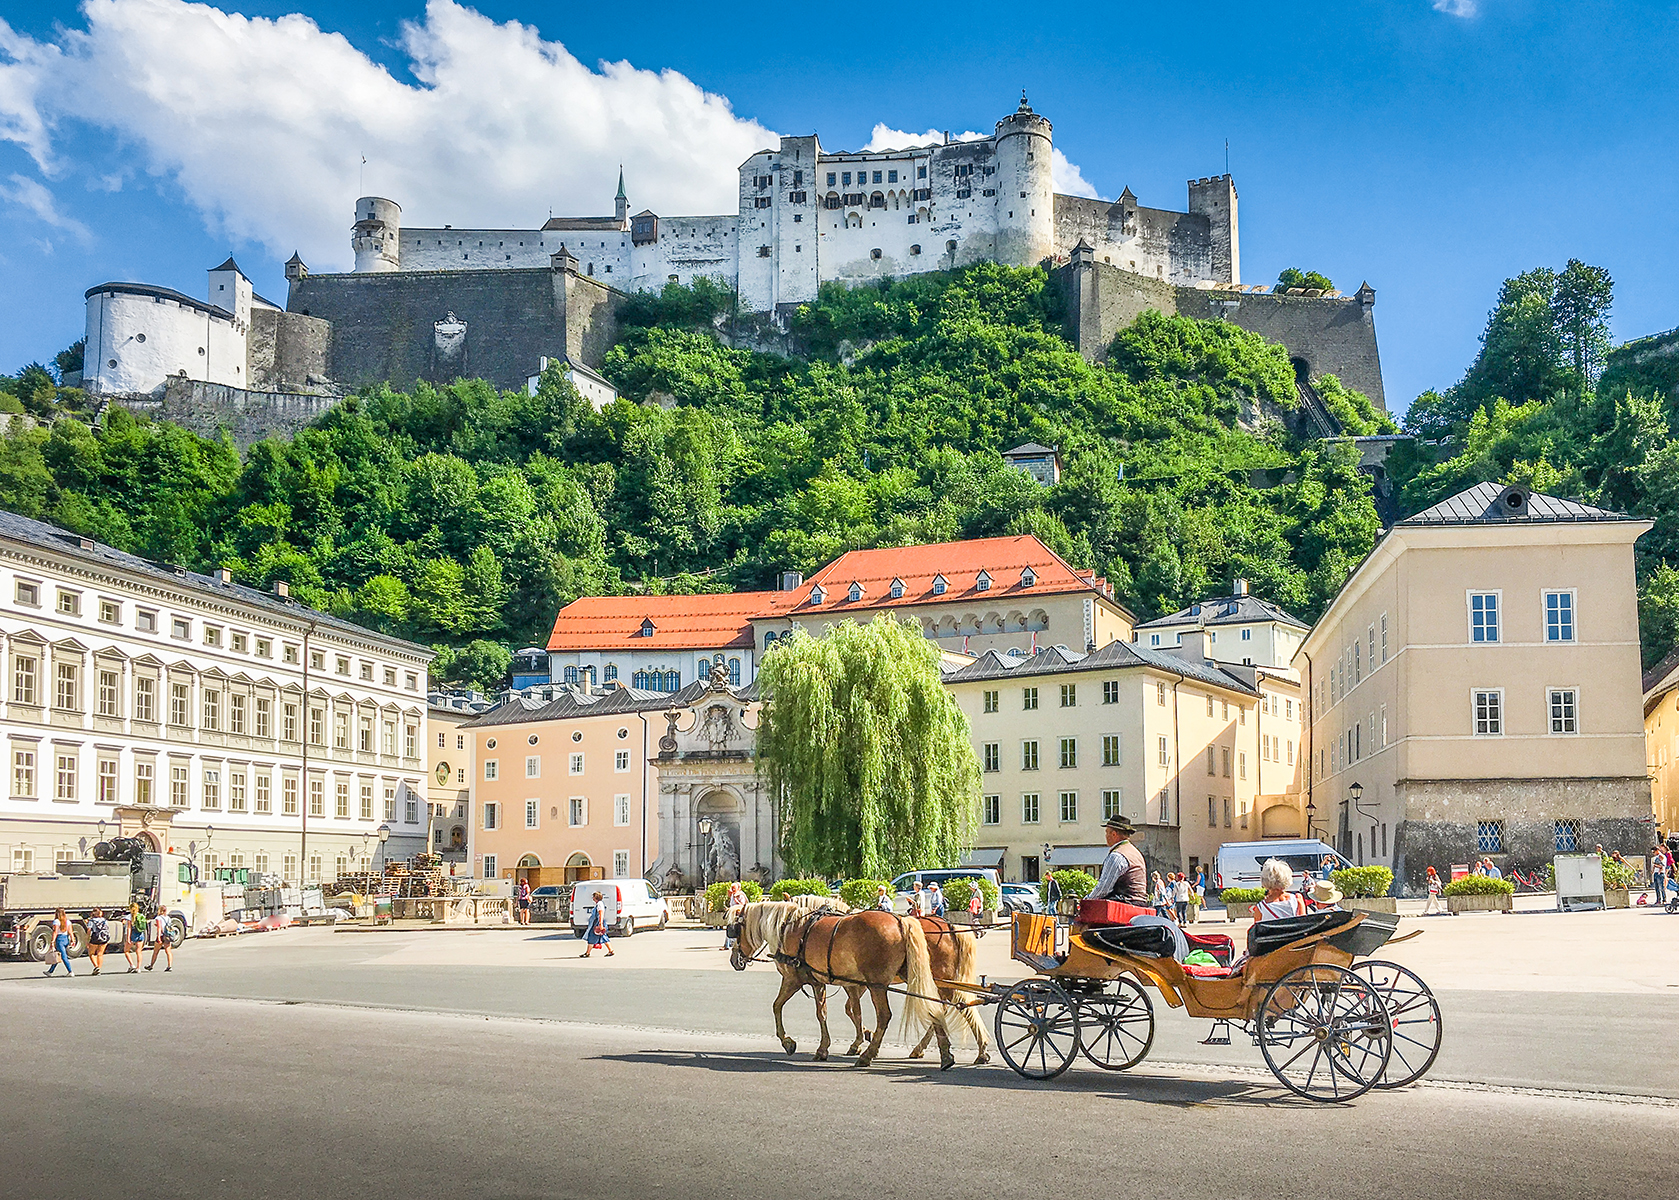 Horse and carriage in the streets of Salzburg